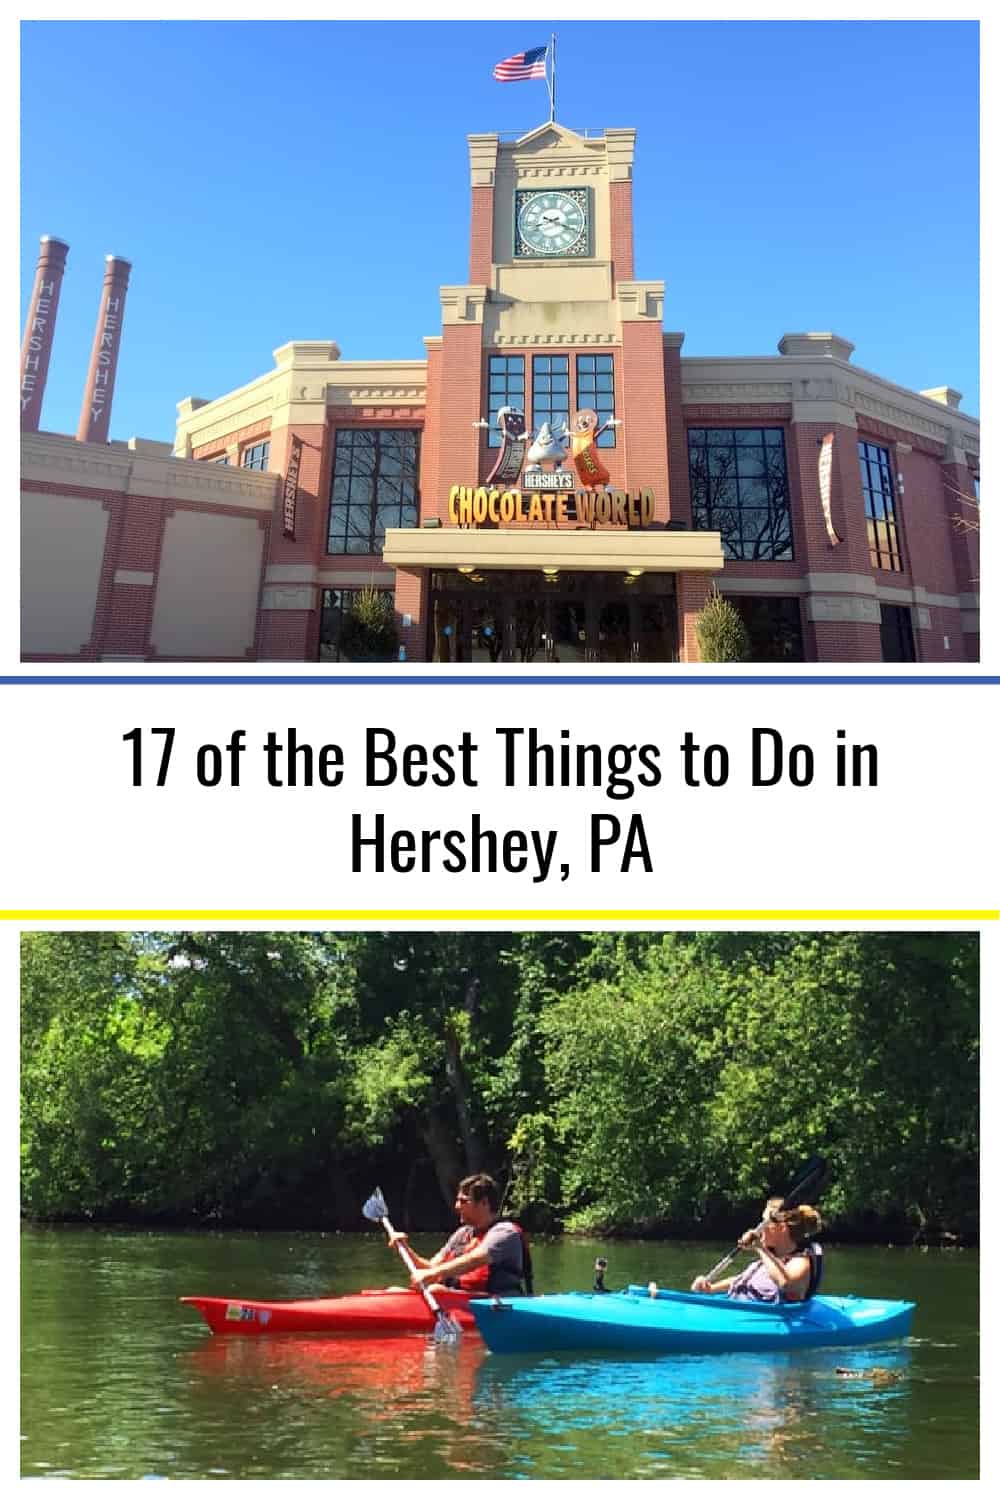 places to visit near hershey pa